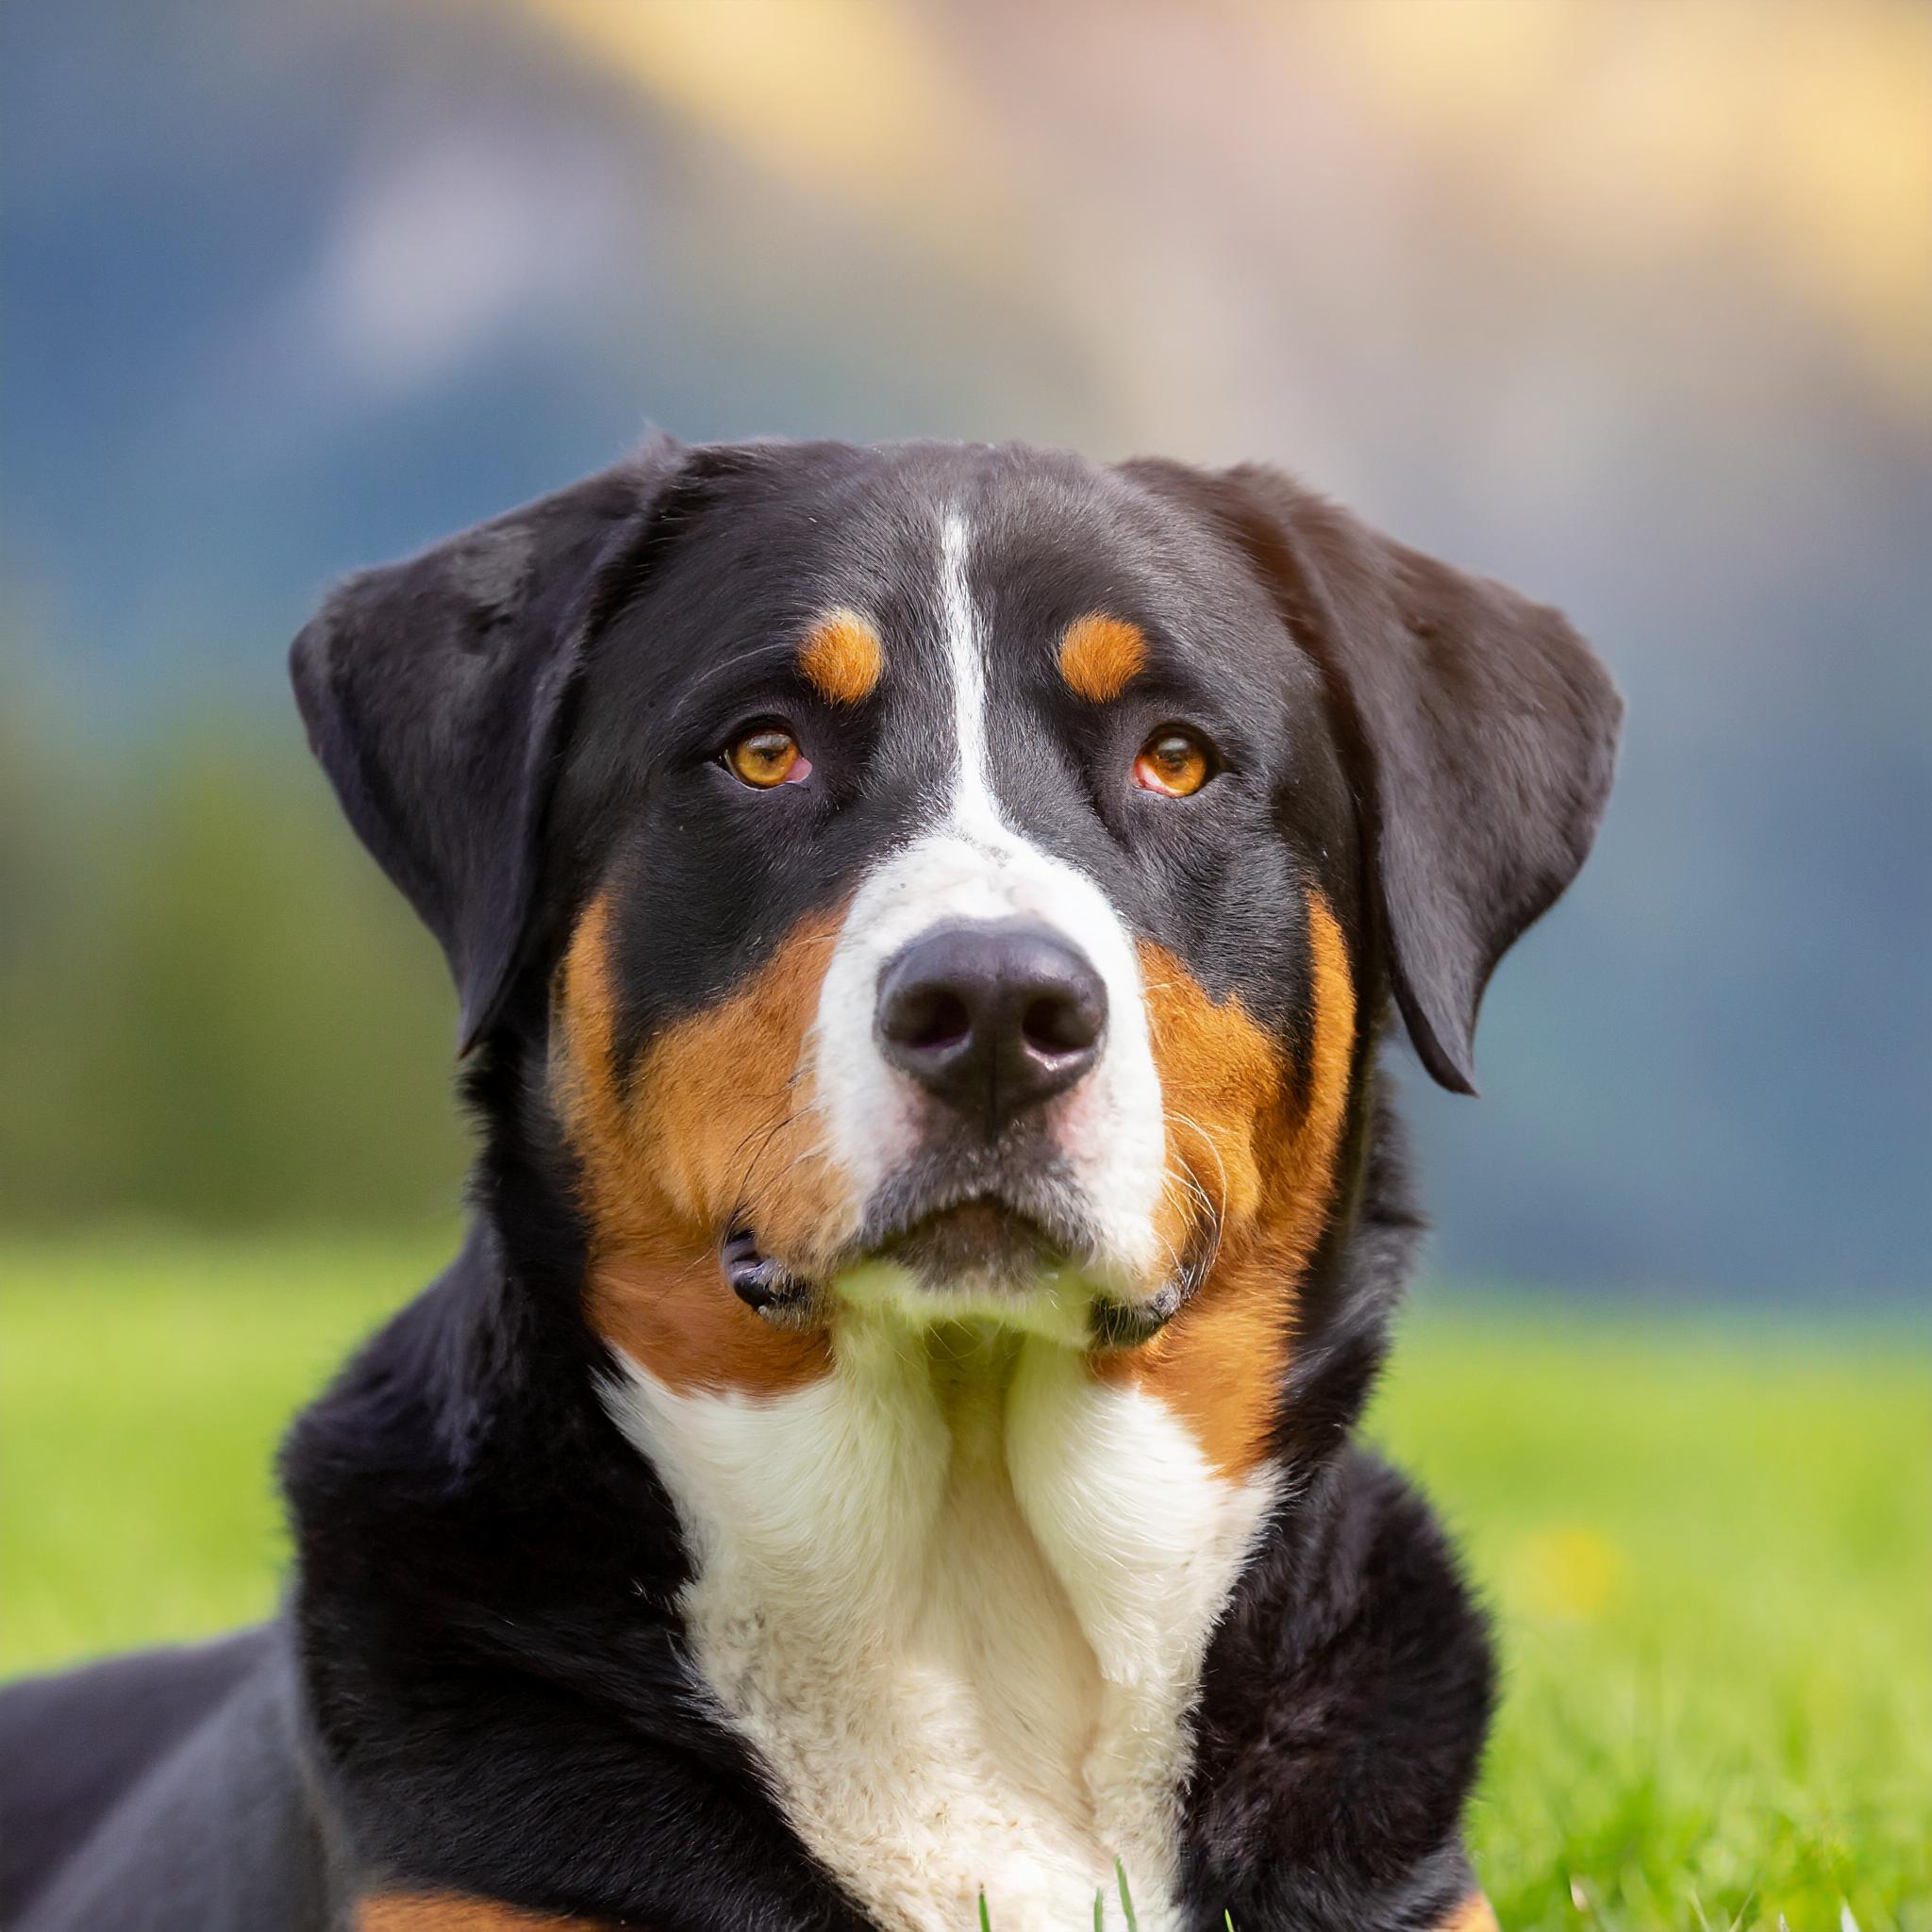 The Appenzeller Sennenhund is a Swiss breed of medium-sized working dog. It originates in the Appenzell region of north-eastern Switzerland, and is one of four regional breeds of Sennenhund or Swiss mountain dog, all of which are characterised by a distinctive tricolour coat.